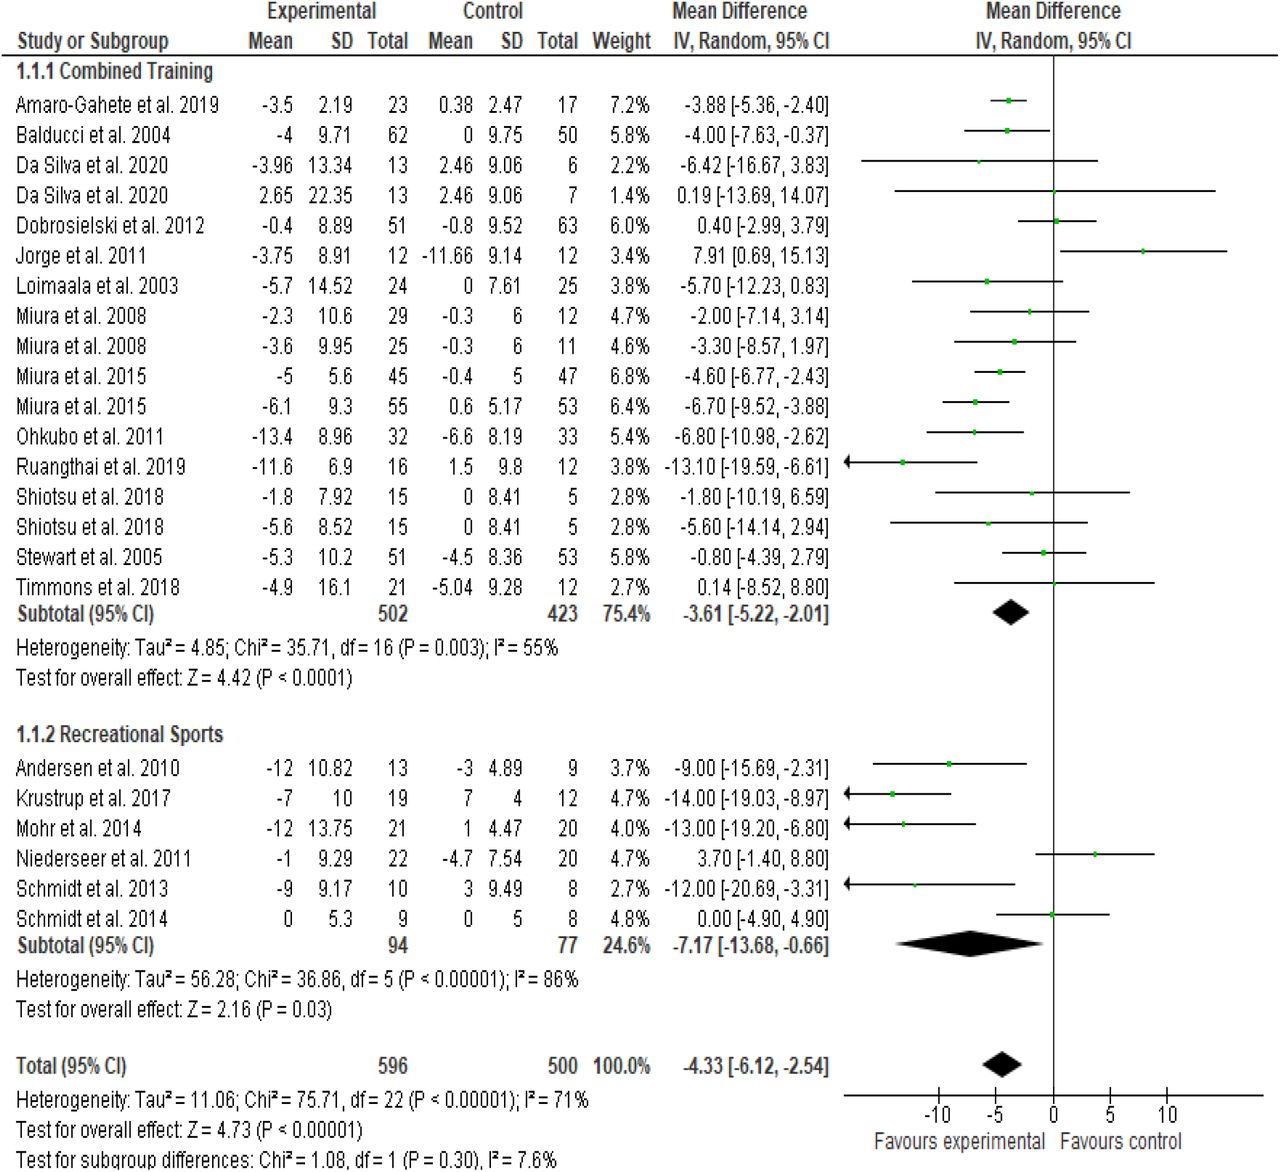 Effects Of Recreational Sports And Combined Training On Blood Pressure And Glycosylated Hemoglobin In Middle Aged And Older Adults A Systematic Review And Meta Analysis Medrxiv